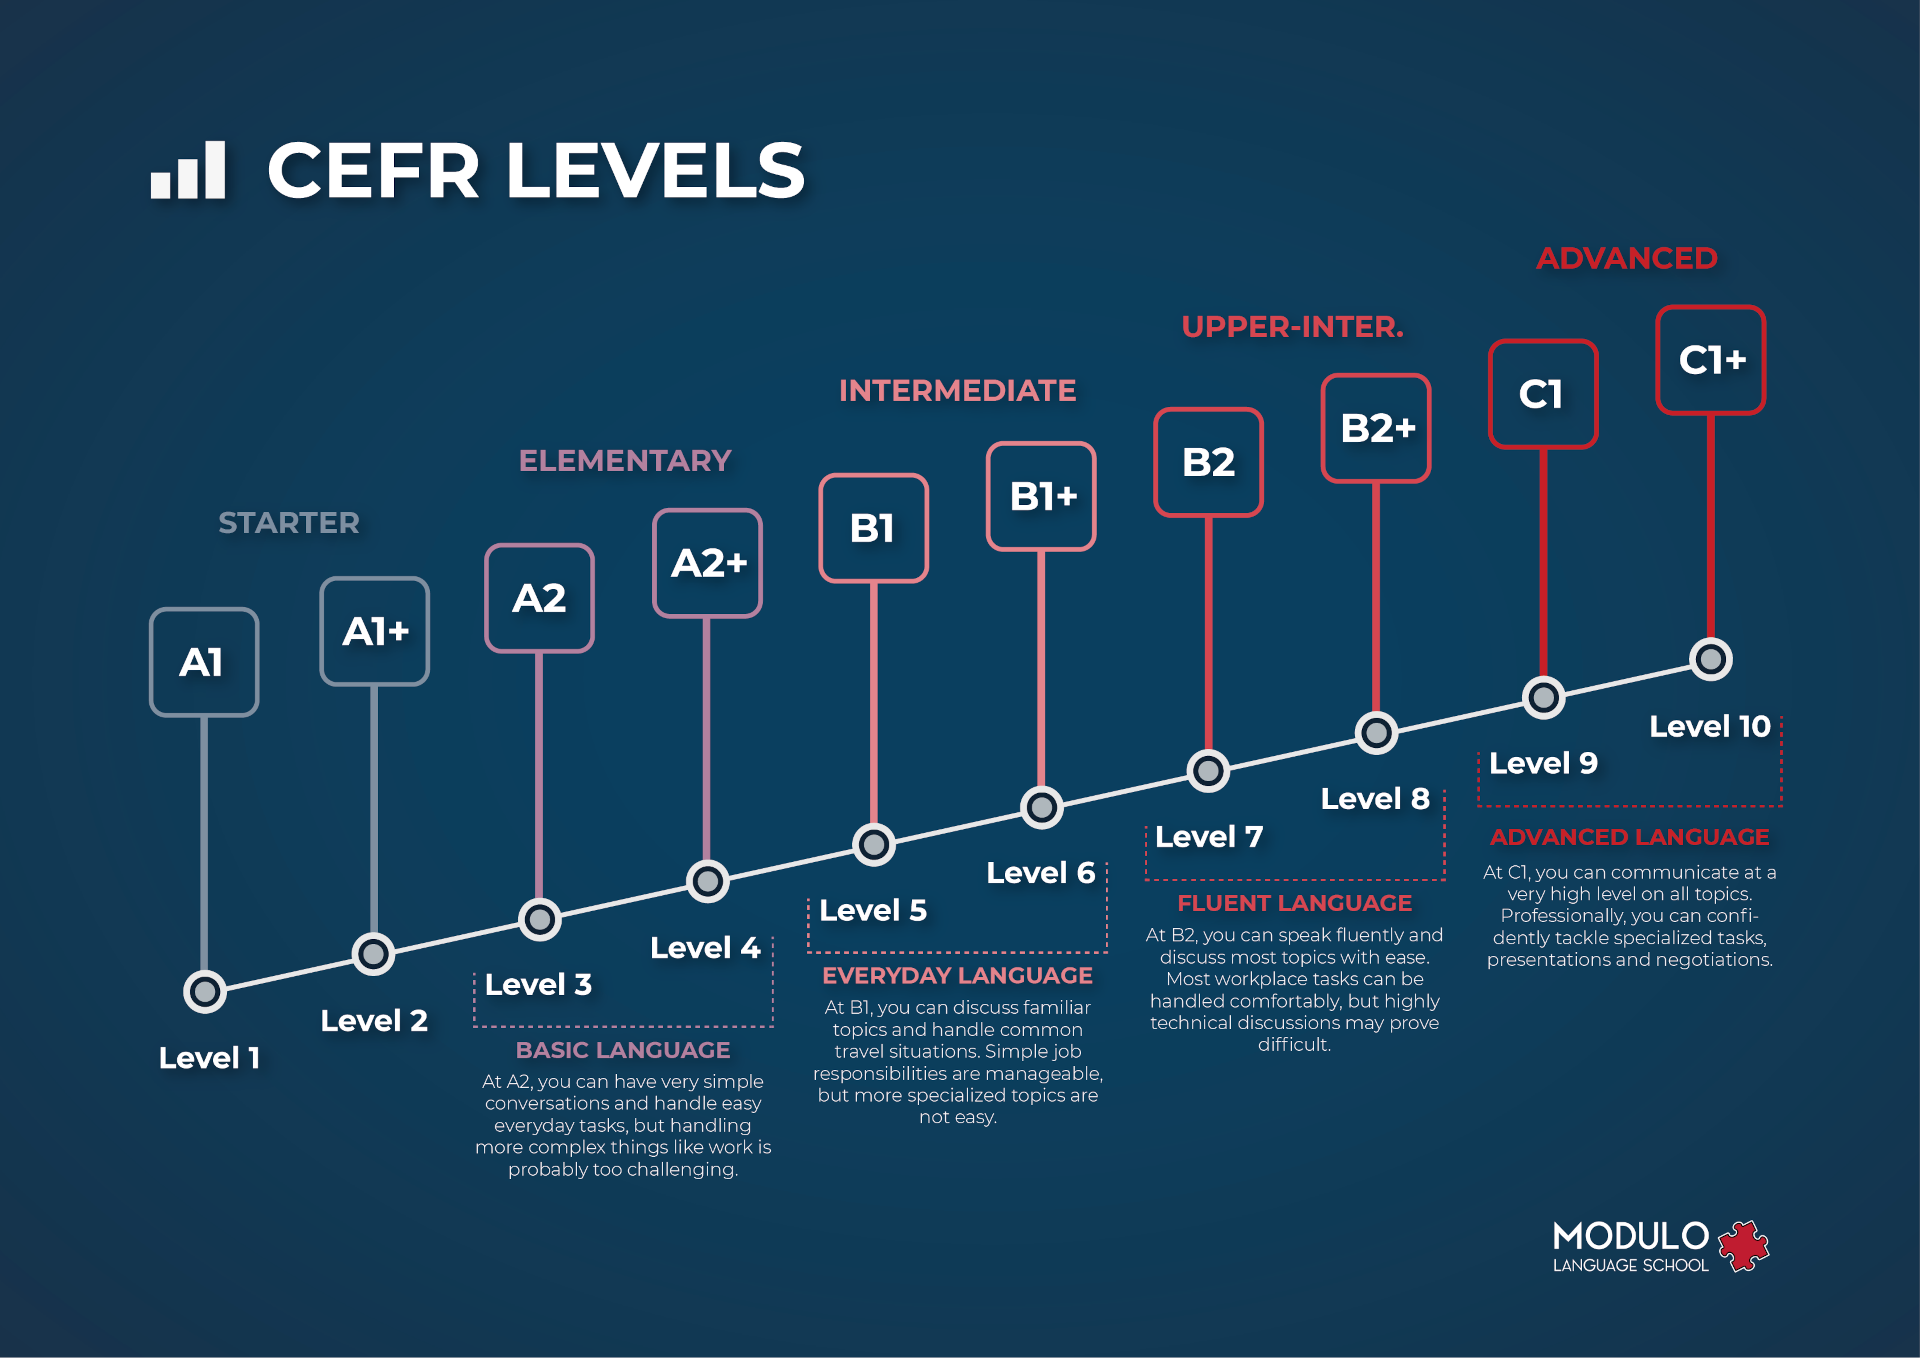 Modulo | Learn About the CEFR Levels You’ll be Assigned